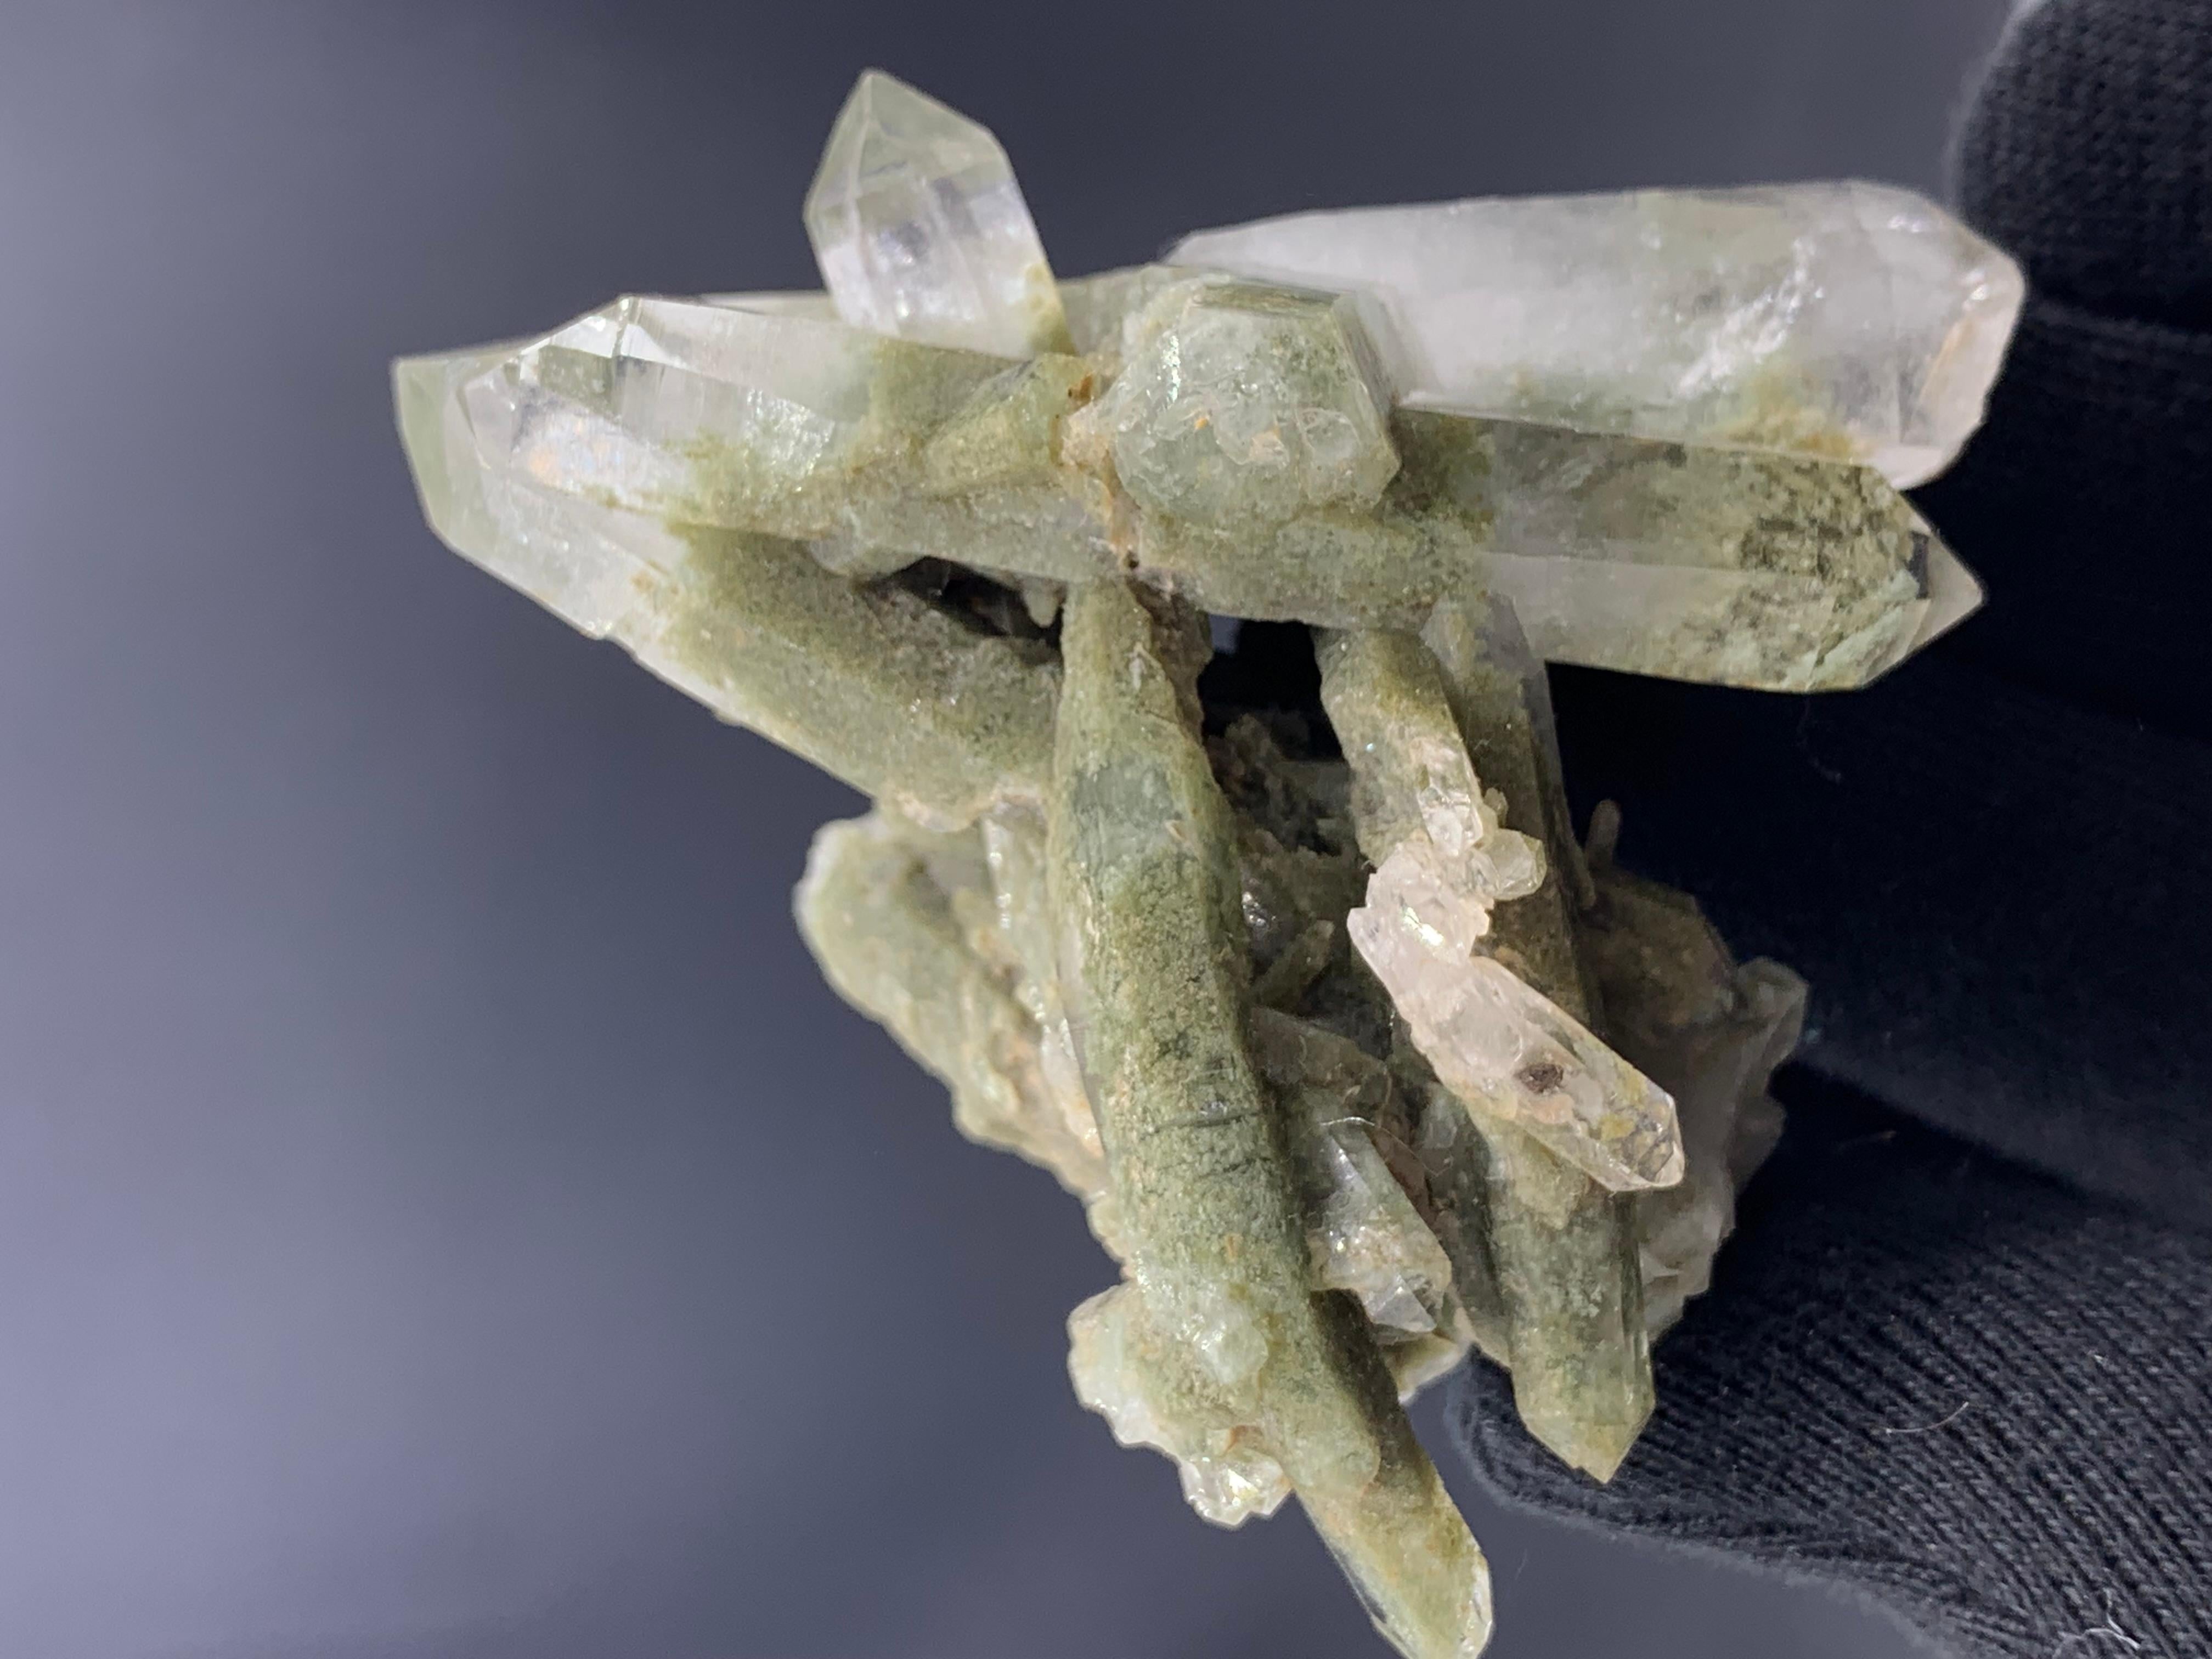 101.29 Gram Lovely Quartz Crystals From Skardu, Pakistan 

Weight: 101.29 Gram
Dimension: 7 x 6.7 x 5.1 Cm
Origin: Skardu, Pakistan 

Quartz is one of the most common minerals in the Earth's crust. As a mineral name, quartz refers to a specific